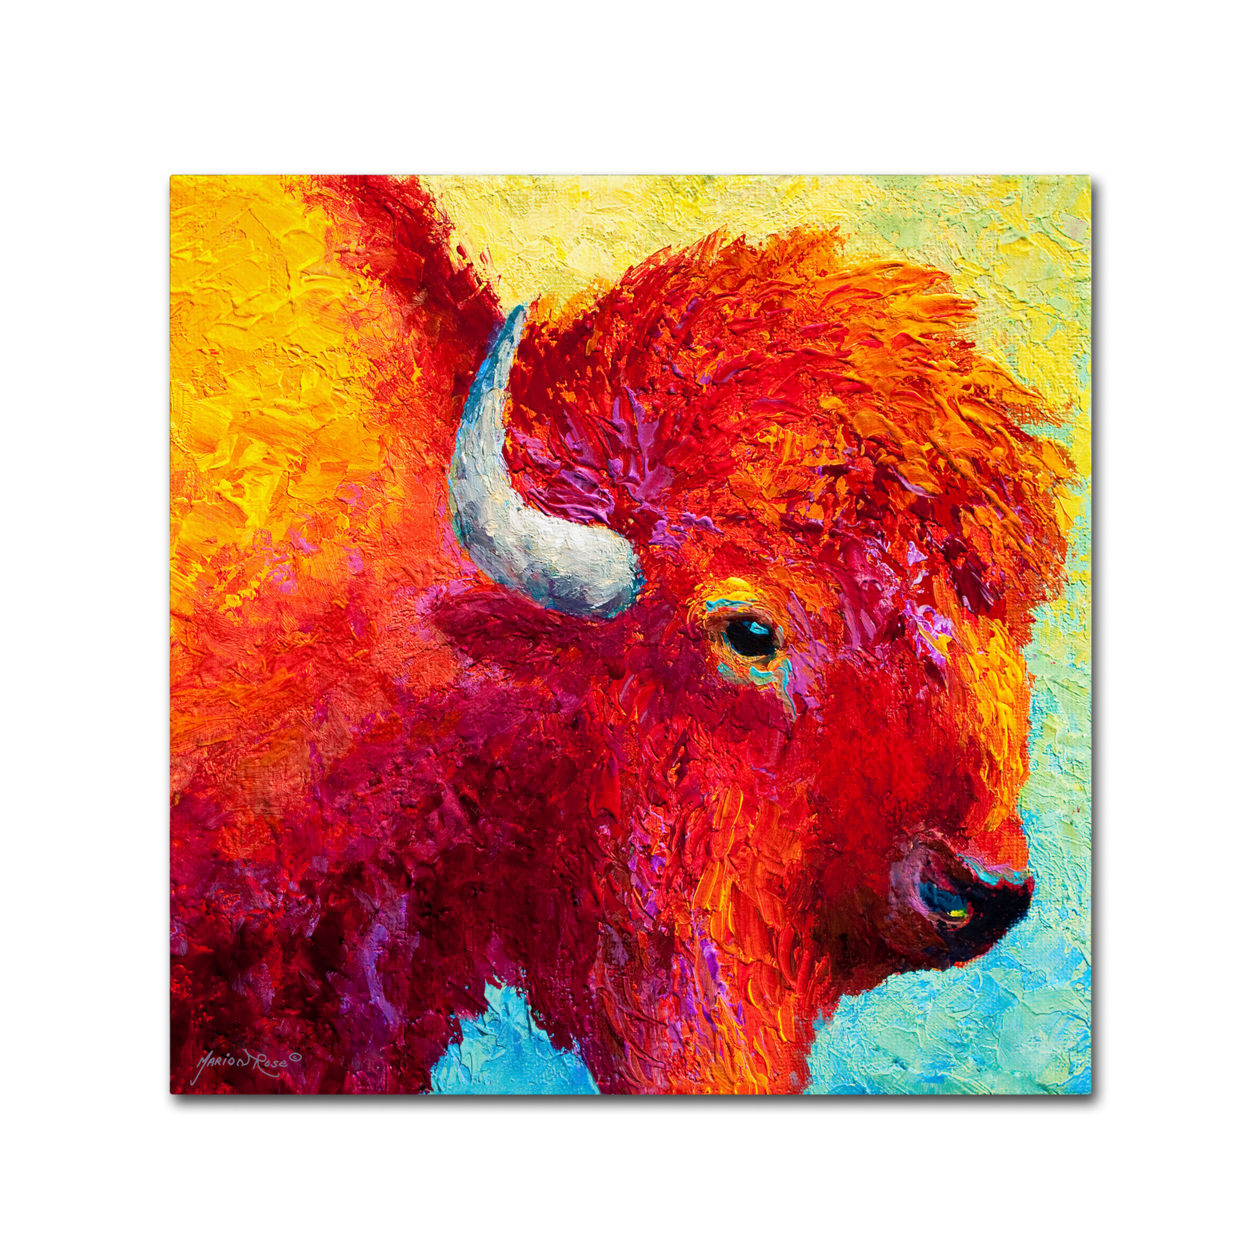 Marion Rose 'Bison Head IV' Ready To Hang Canvas Art 18 X 18 Inches Made In USA